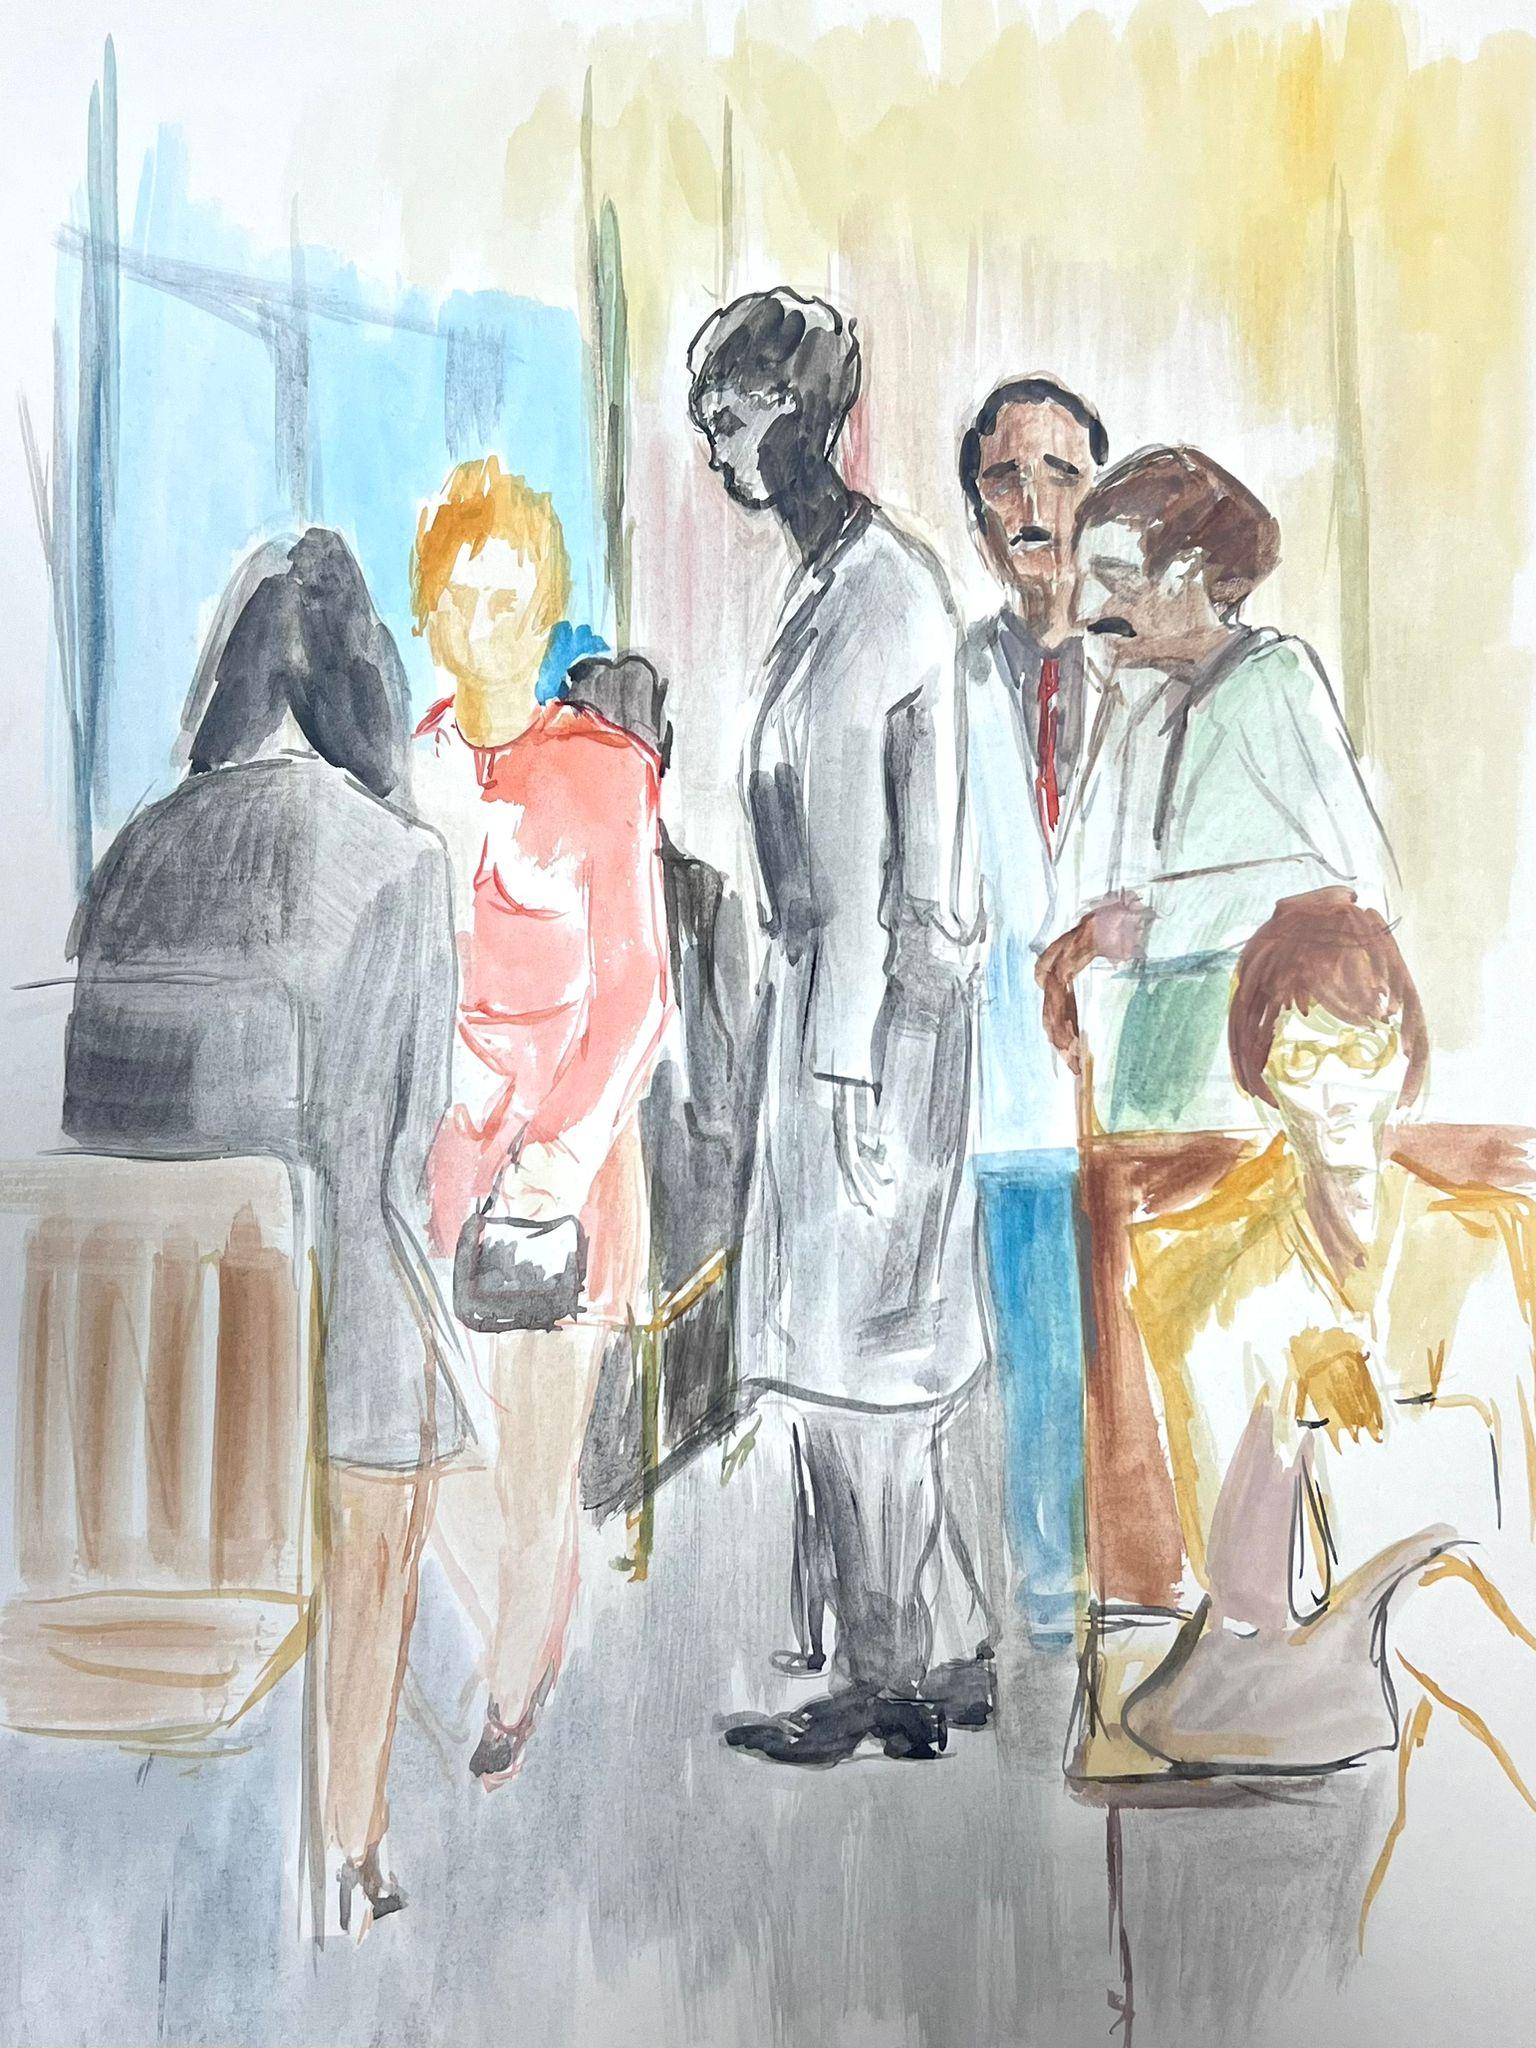 Guy Nicod Figurative Art - 20th Century French Painting Figures In Waiting Room Watercolour 